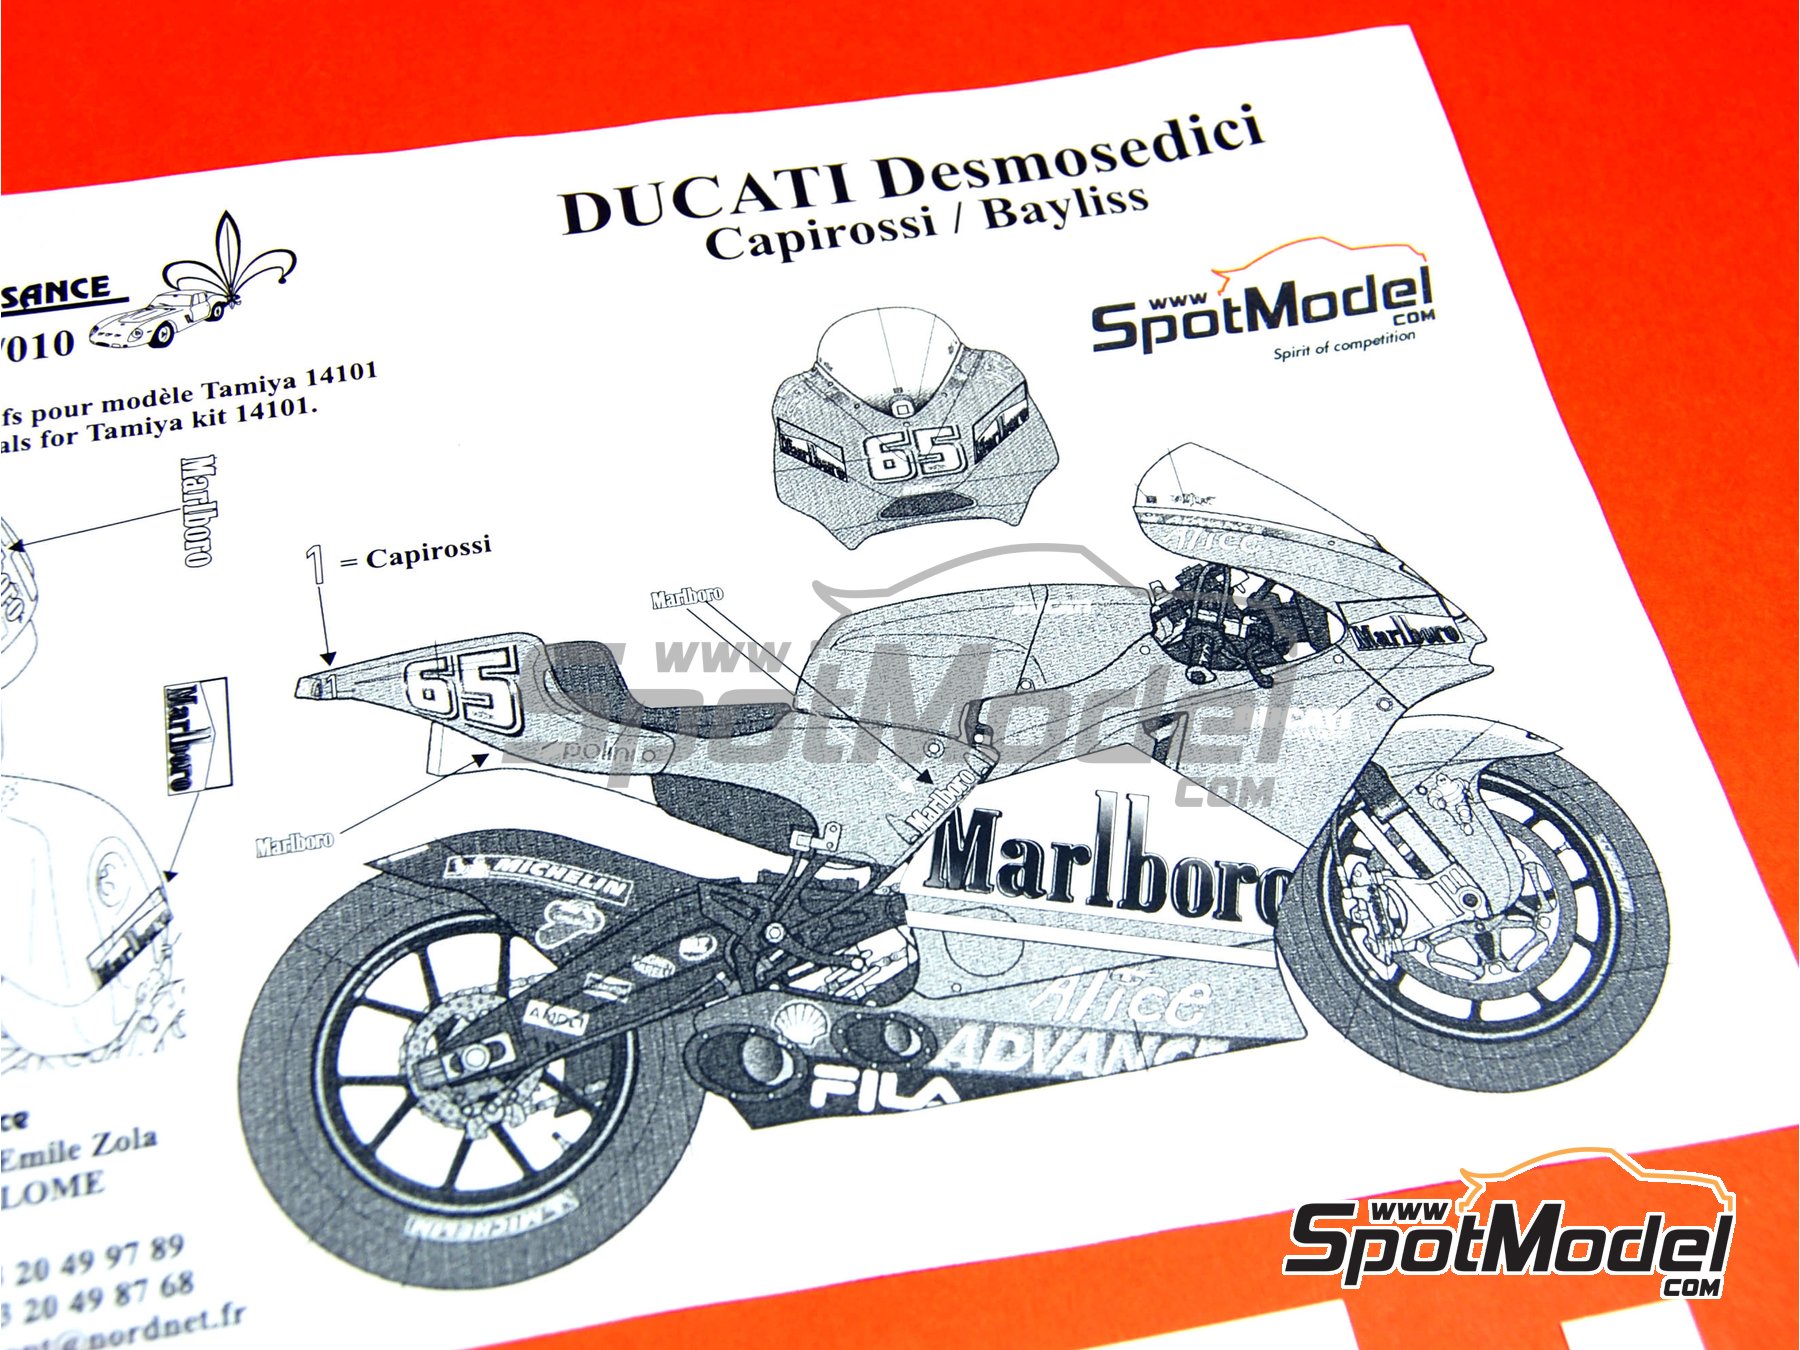 Ducati Desmosedici GP4 sponsored by Marlboro - Motorcycle World  Championship 2004. Logotypes in 1/12 scale manufactured by Renaissance  Models (ref. MT